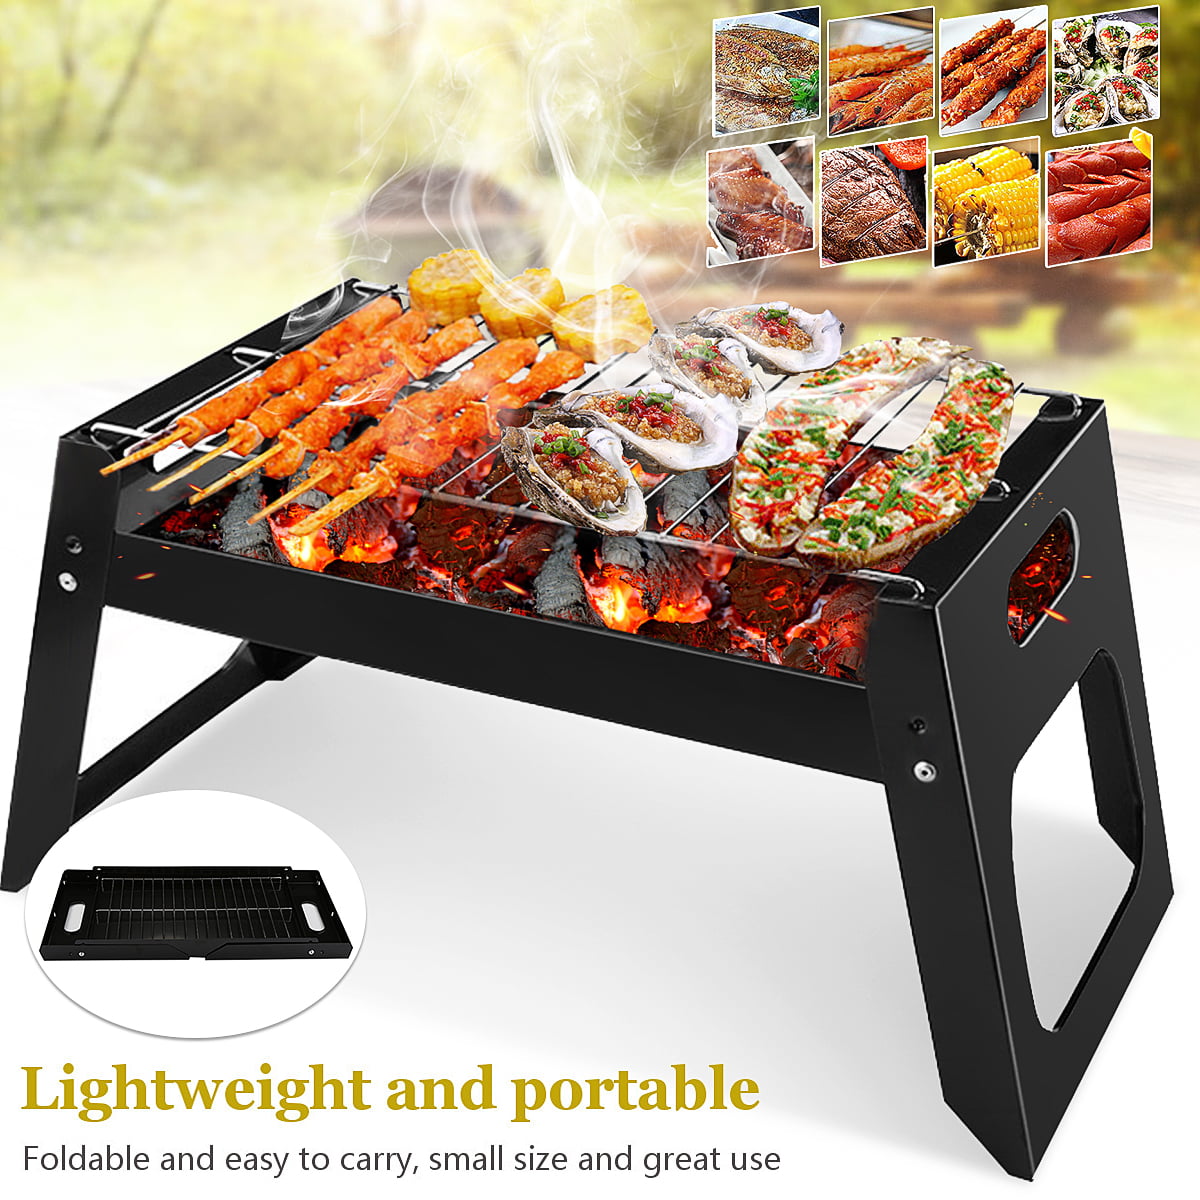 Stainless Steel Portable BBQ Grill Stove for Outdoor Cooking Camping Picnics Army Green Large Size Boutique 9 Barbecue Charcoal Grill